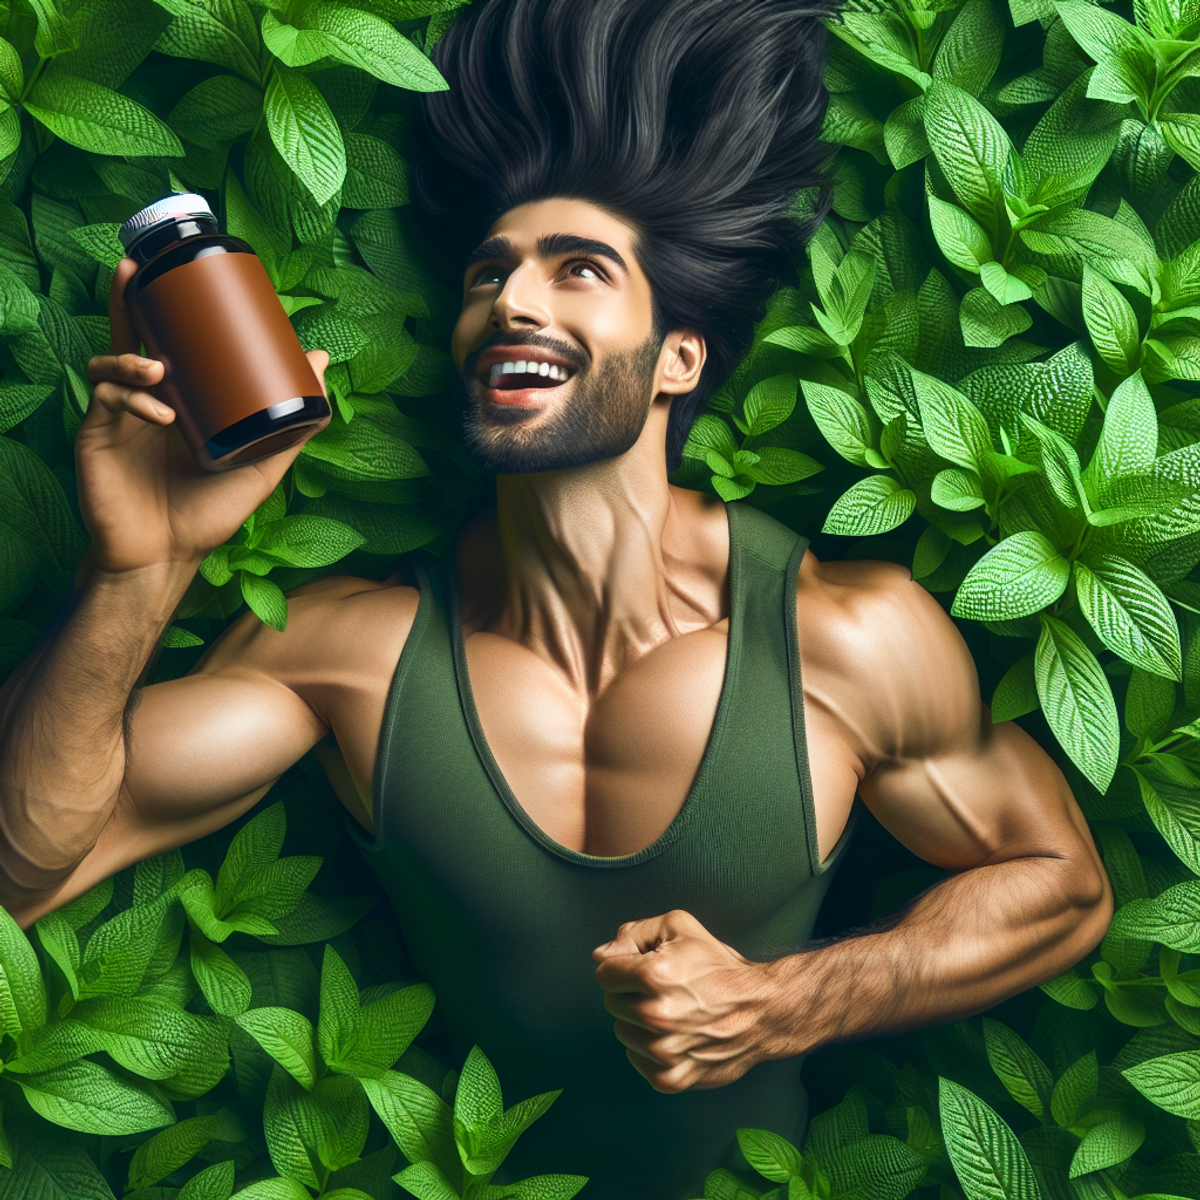 A South-Asian man standing confidently in lush greenery, holding a brown herbal supplement bottle.